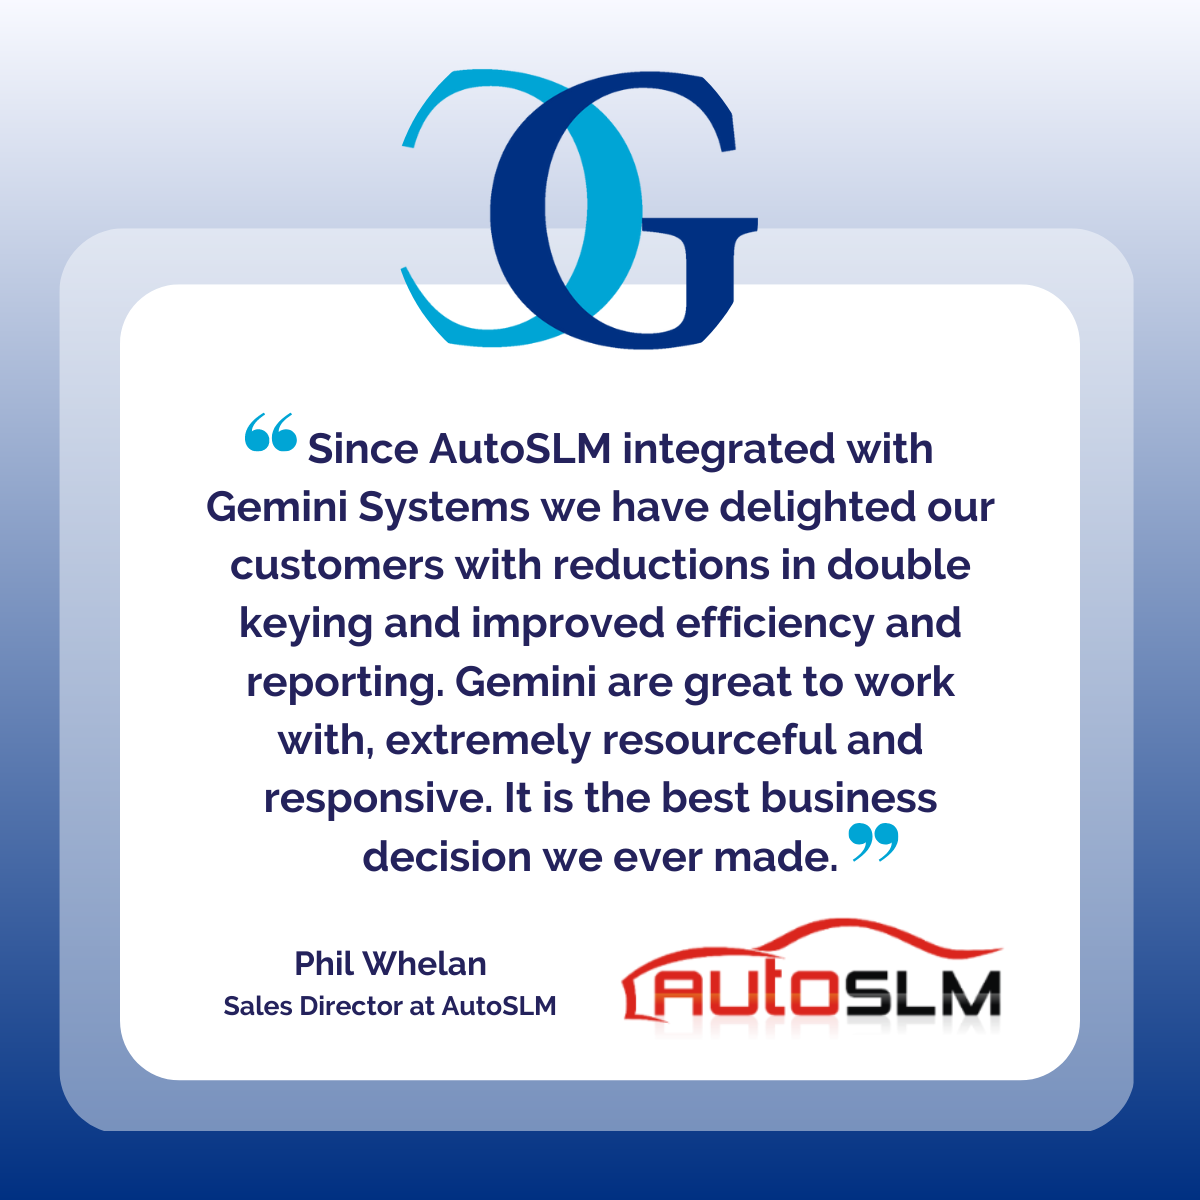 Gemini’s integration with AutoSLM: Making the sales process seamless.